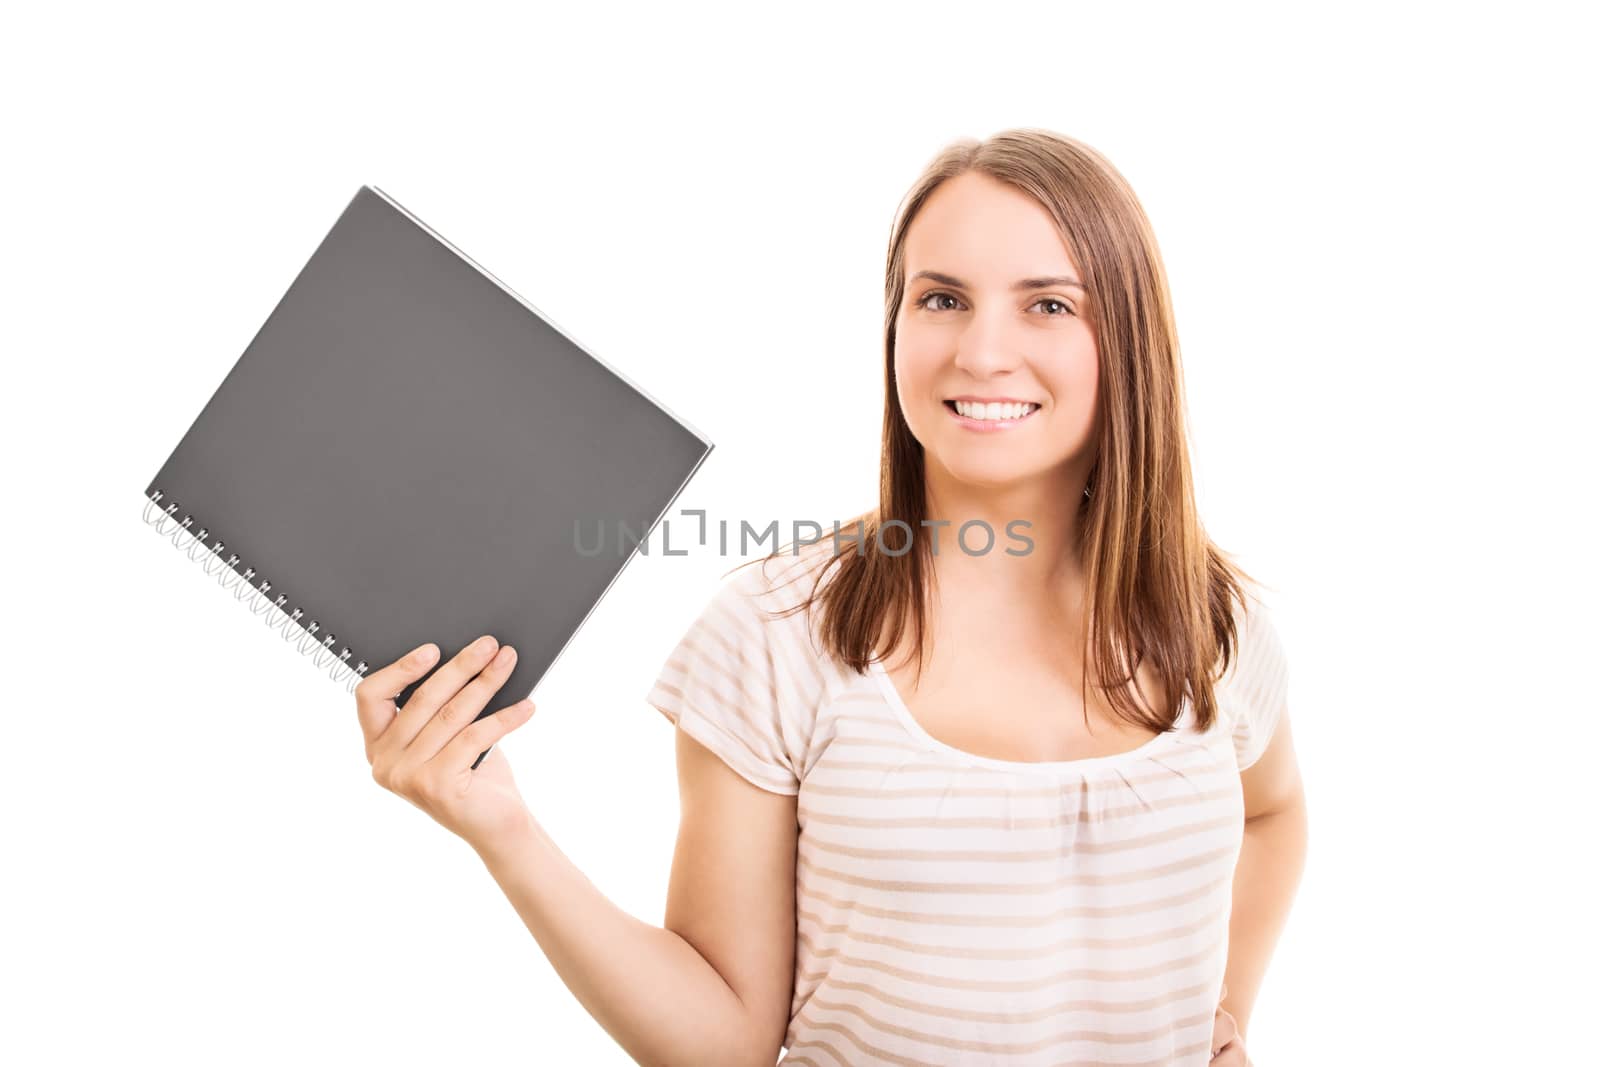 Smiling young student girl holding a notebook, isolated on white background.